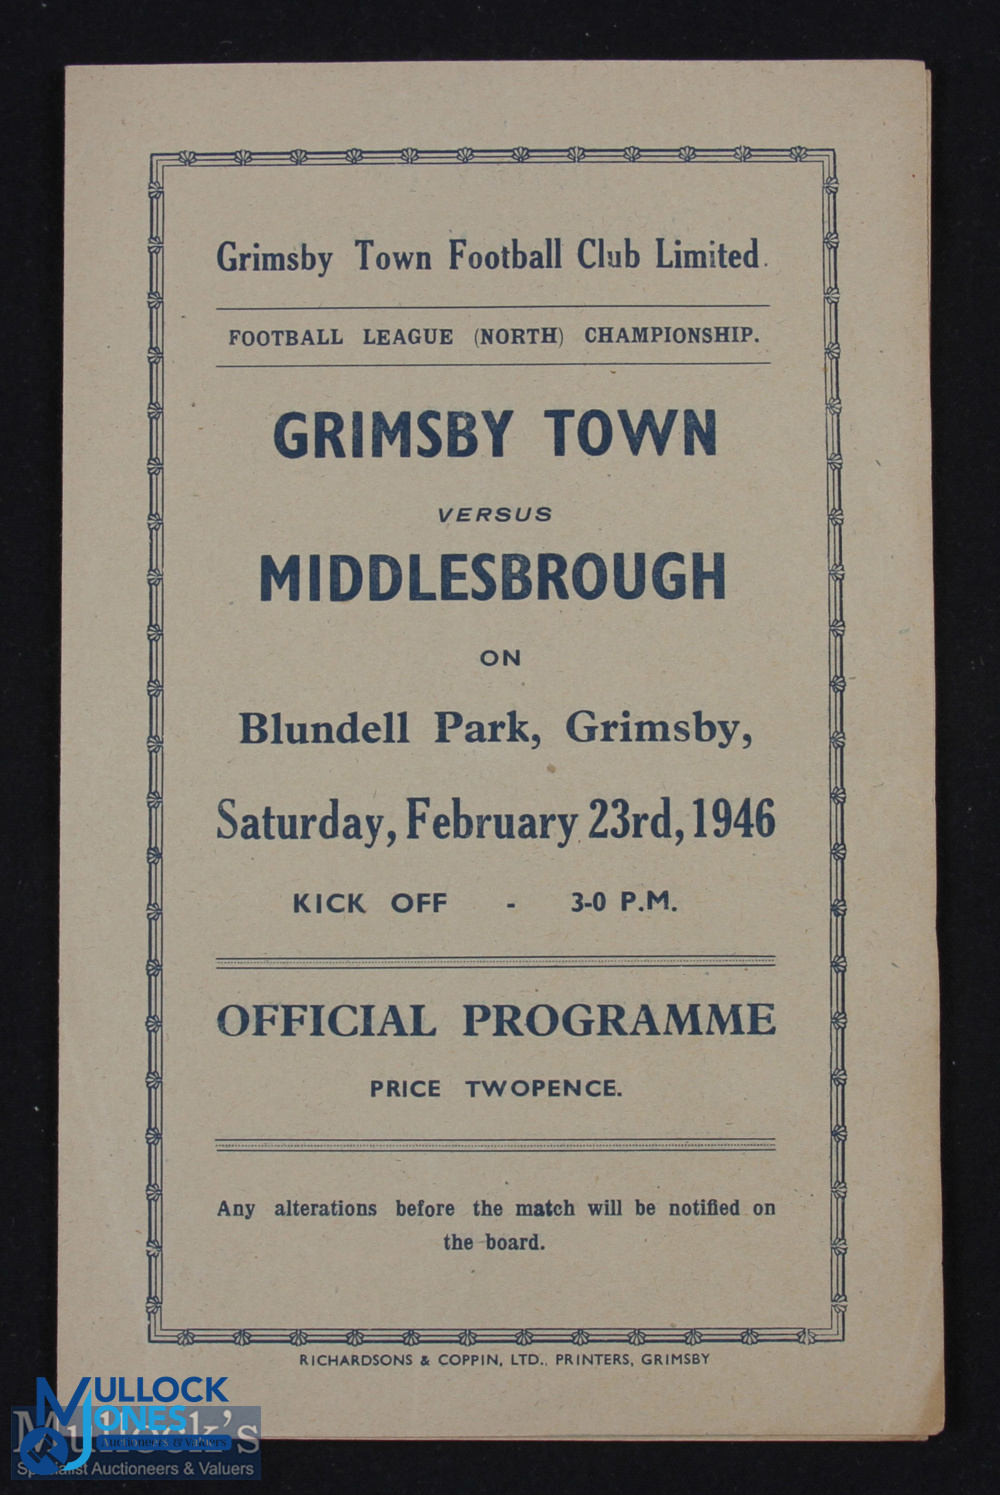 1945/46 Football League North Grimsby Town v Middlesbrough 4 page match programme, 23 February 1946;